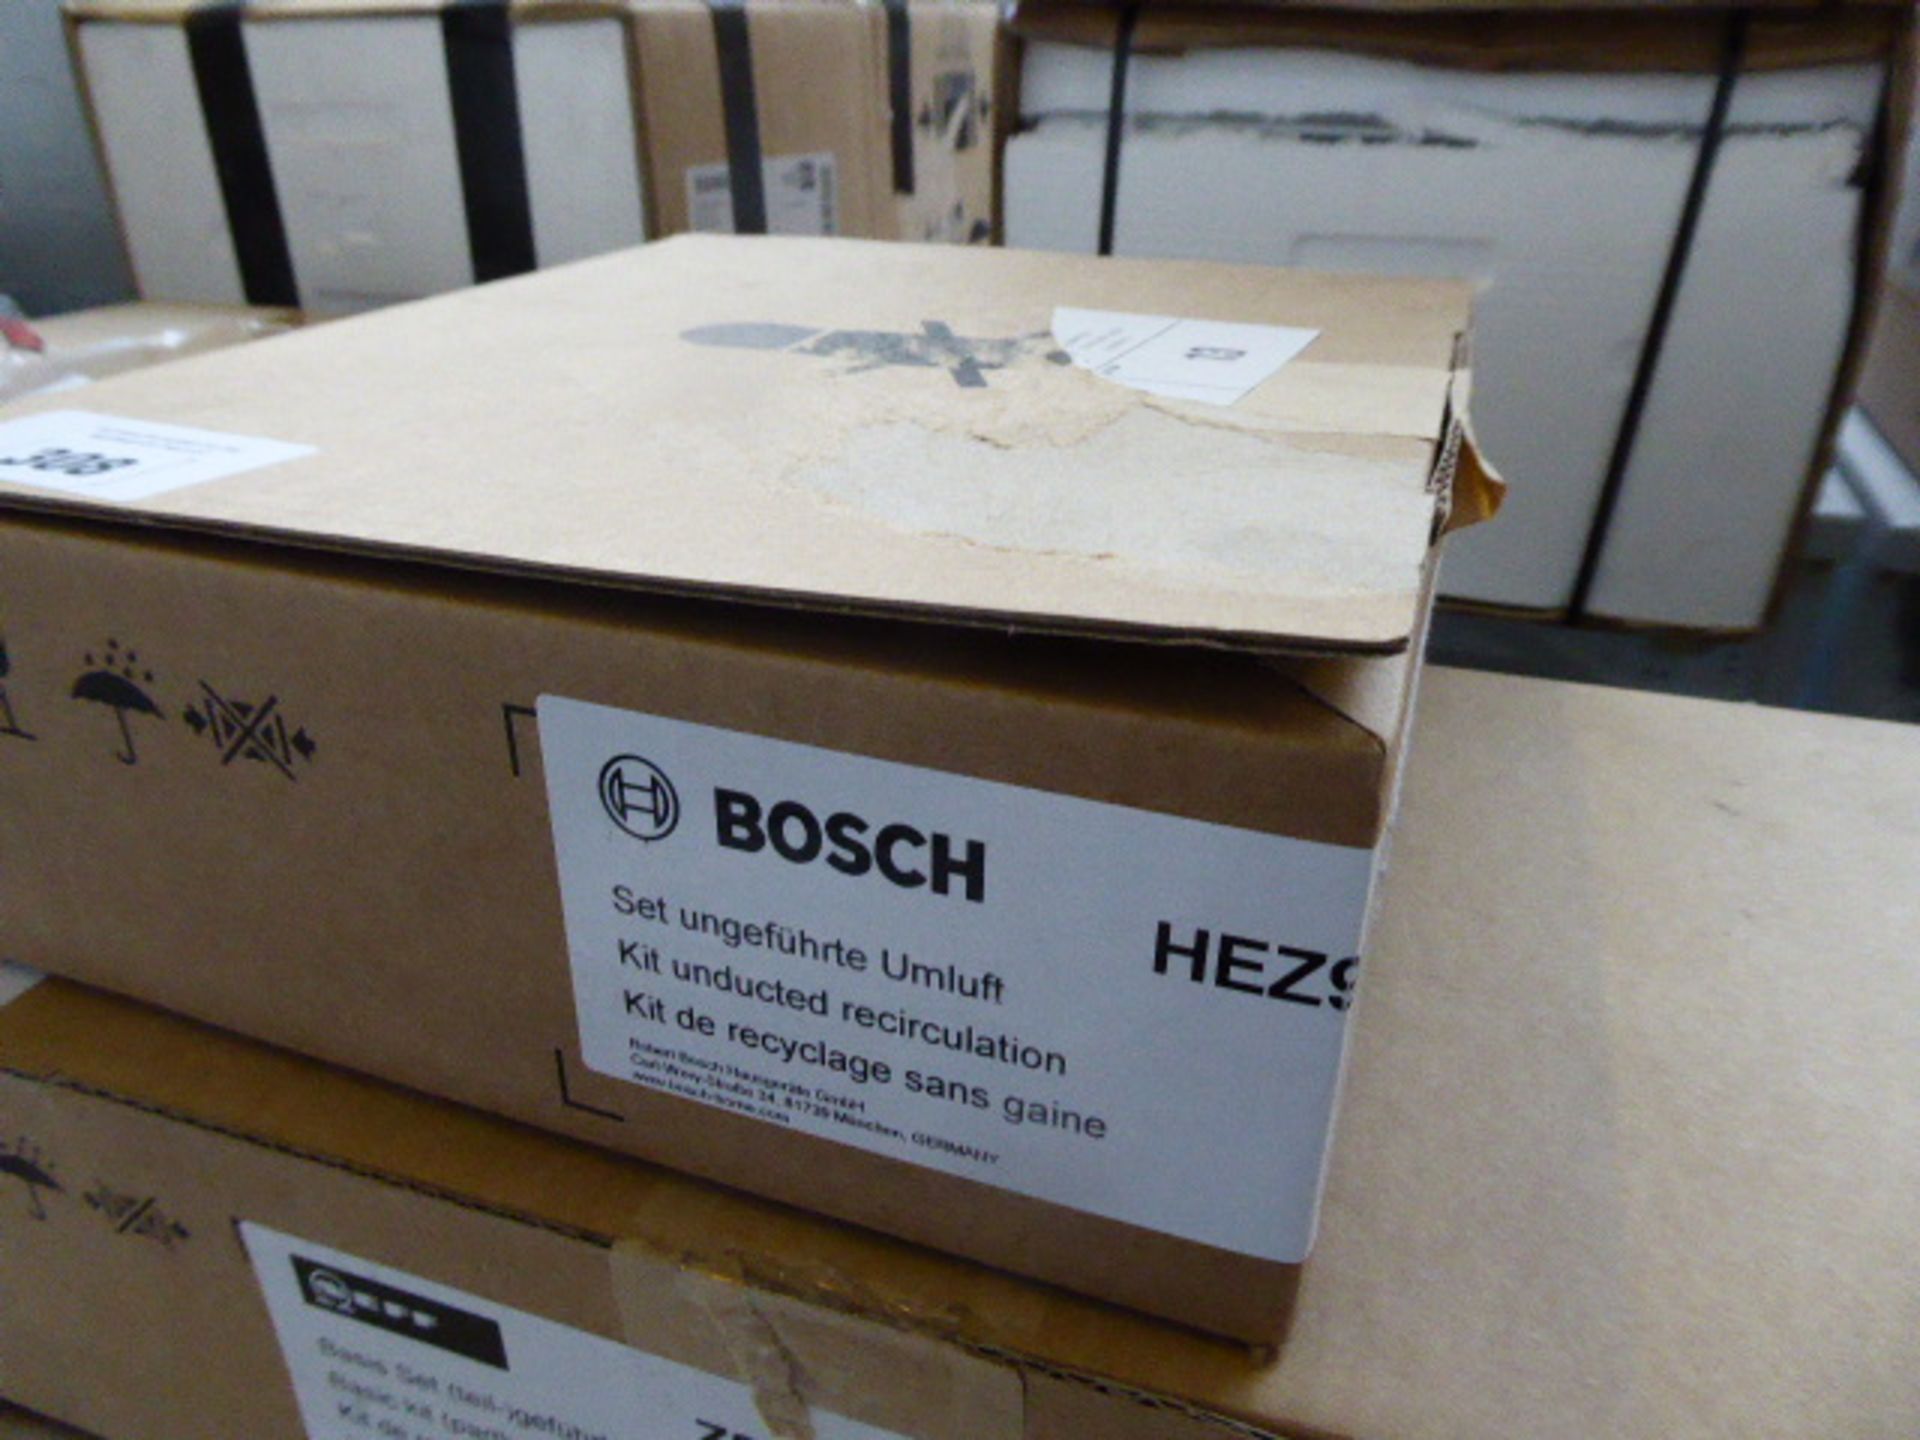 HEZ9VRUD0-B Bosch Kit Unducted Recirculation - Image 2 of 2